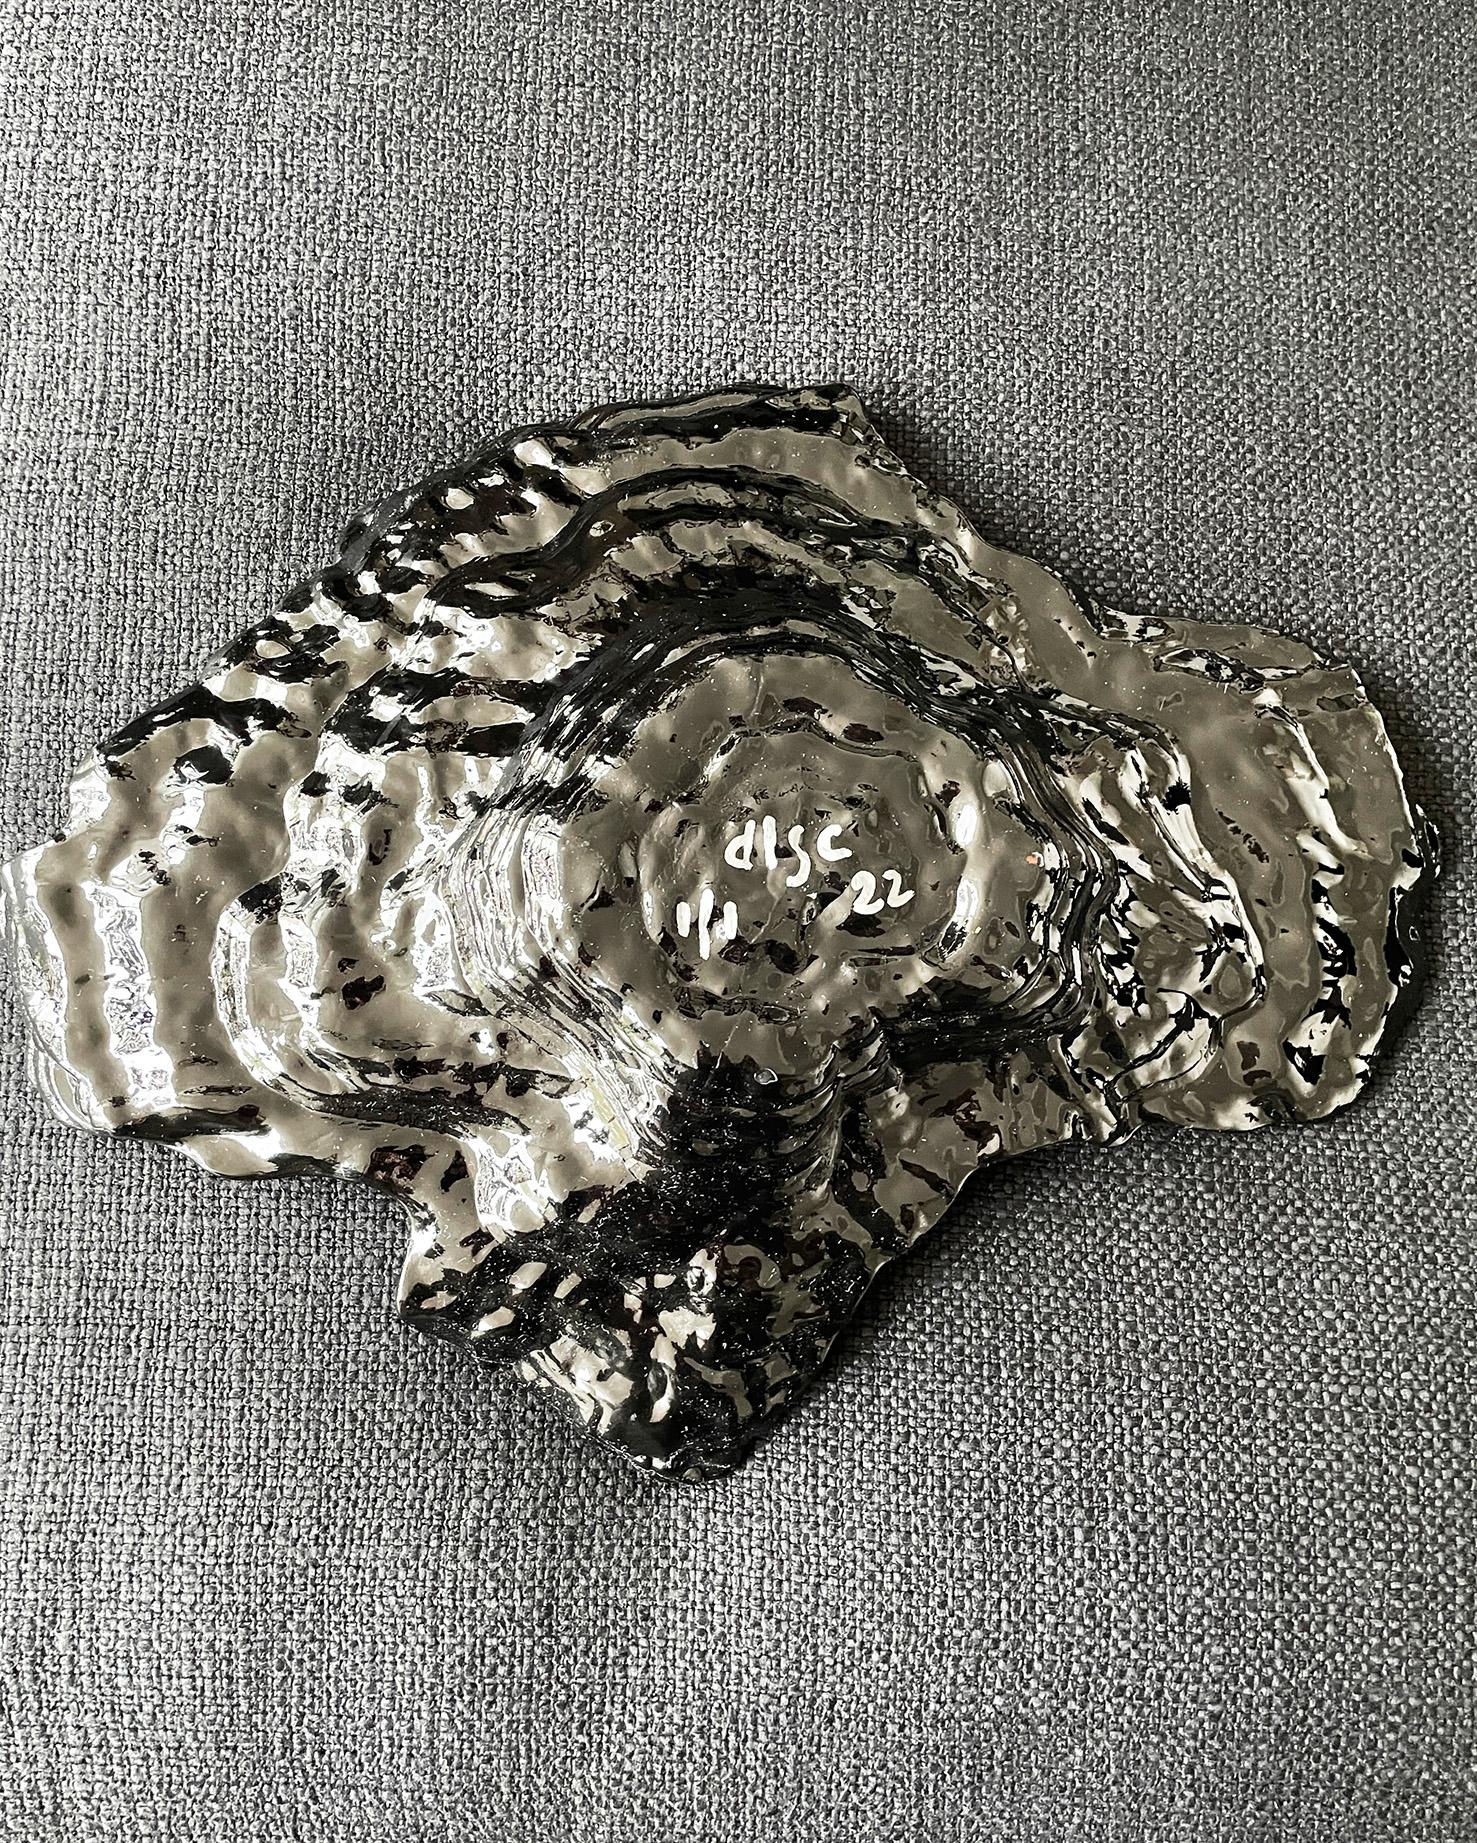 This one I don't want to find a new home for. Since this a joy to look at every day. But I would want to share this with the right person, so alas, I'll let it go.... This irregular natural shape of the substantial glass dish is beautiful. The eye